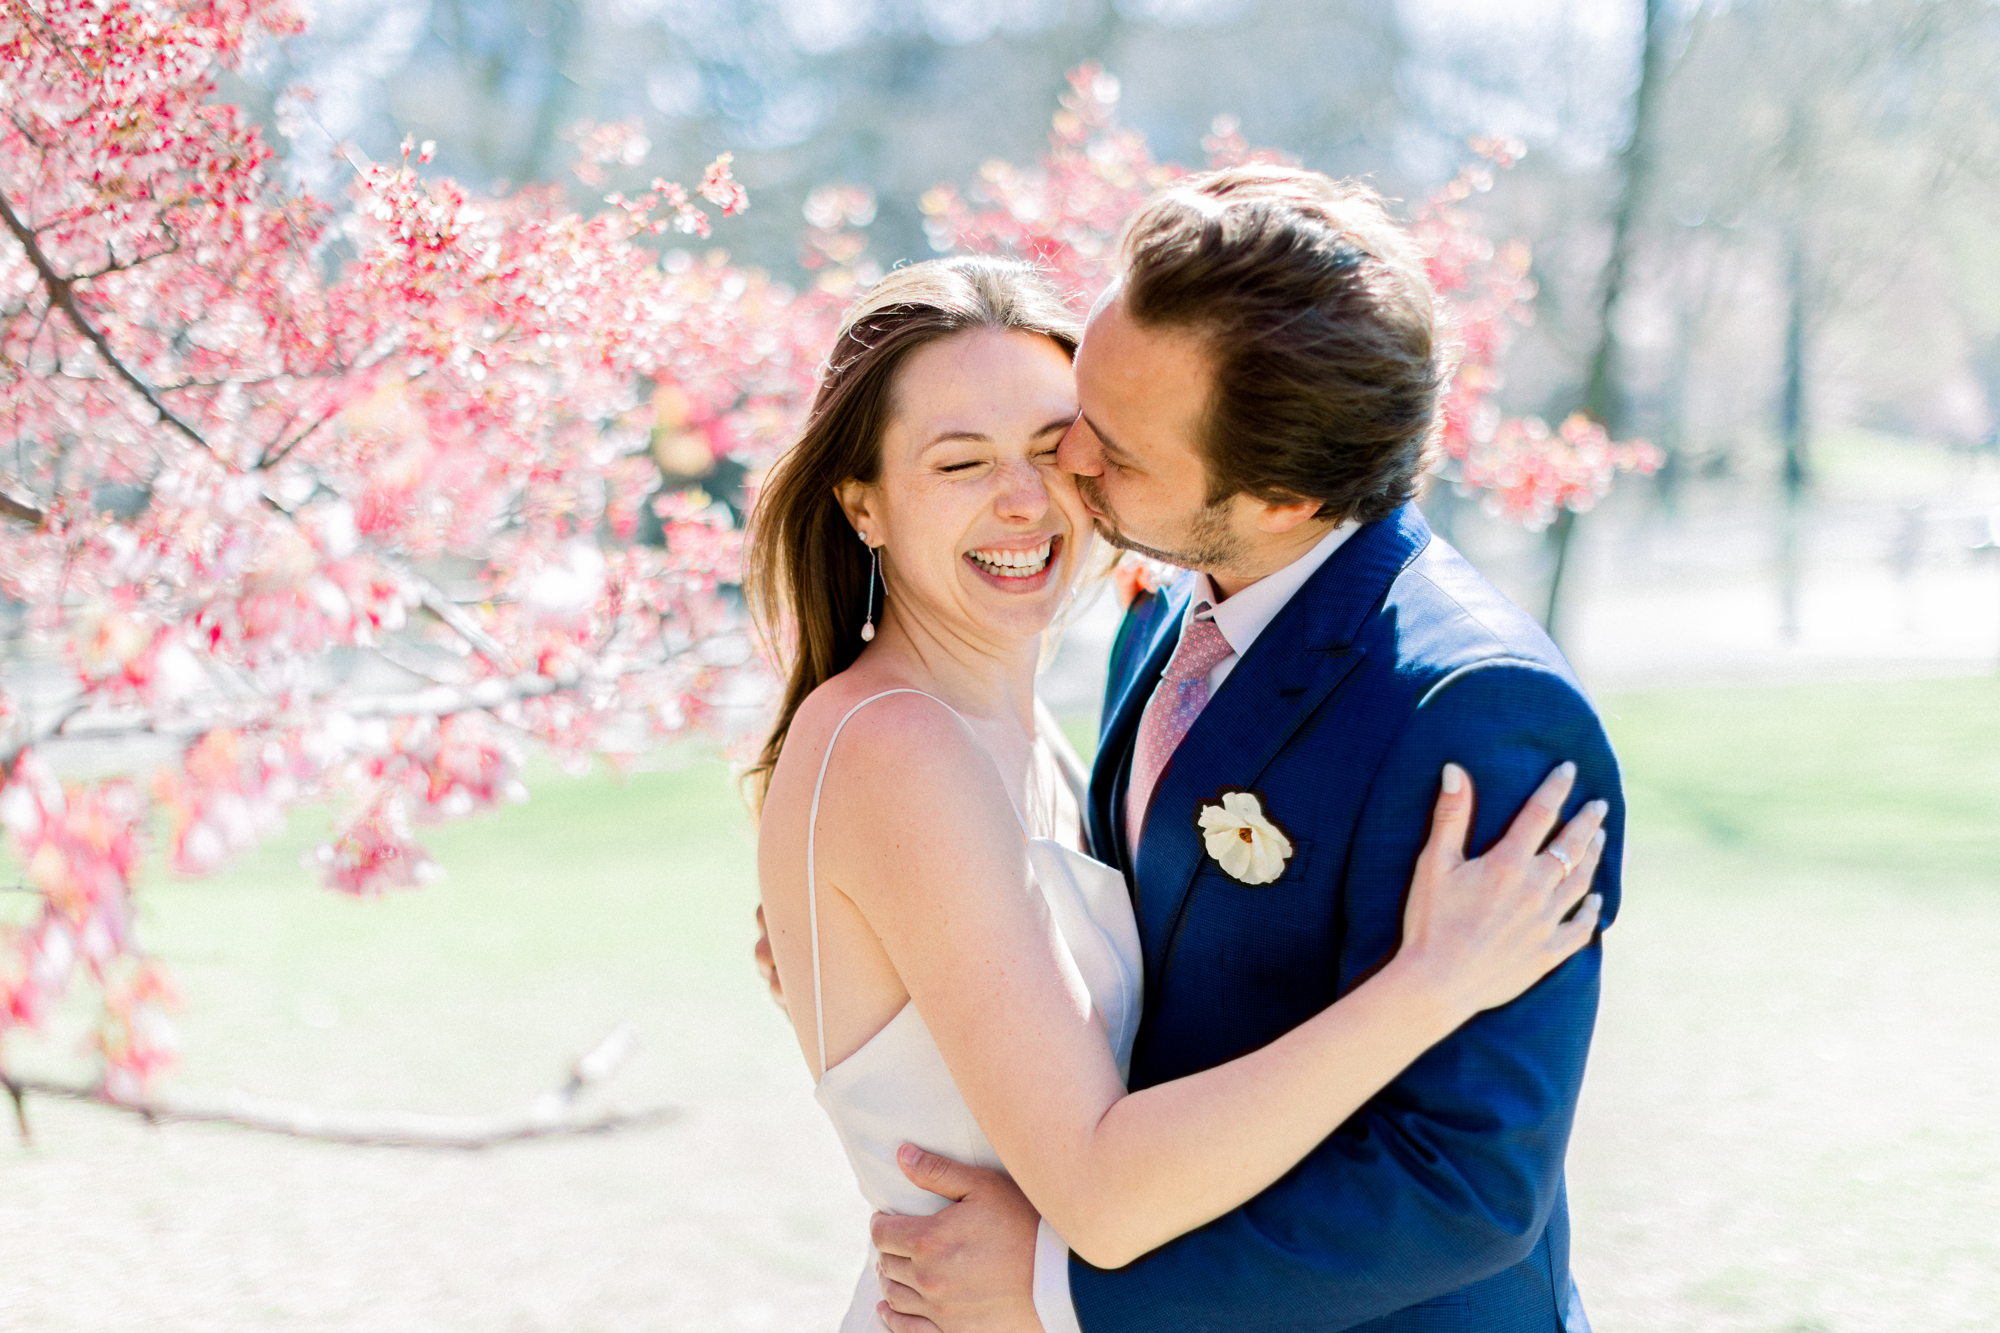 Stunning Spring Bow Bridge Wedding in Central Park Among the Cherry Blossoms